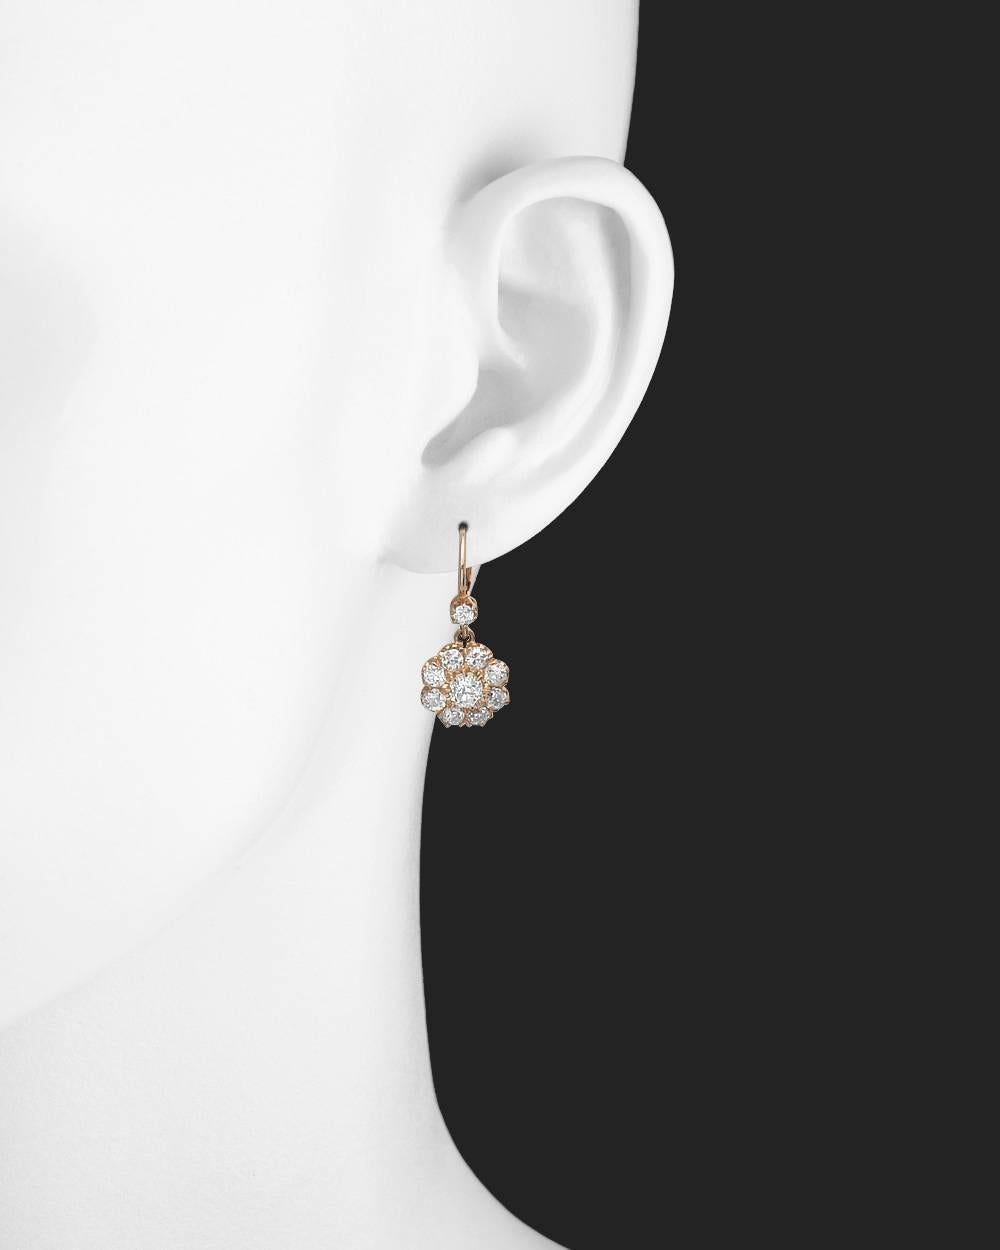 Diamond floret cluster drop earrings, set with twenty old mine-cut diamonds weighing approximately 3.00 total carats, the earrings in 18k pink gold. French wire with leverback. 1.05" length (27mm) and 0.43" width (11mm) at widest point.